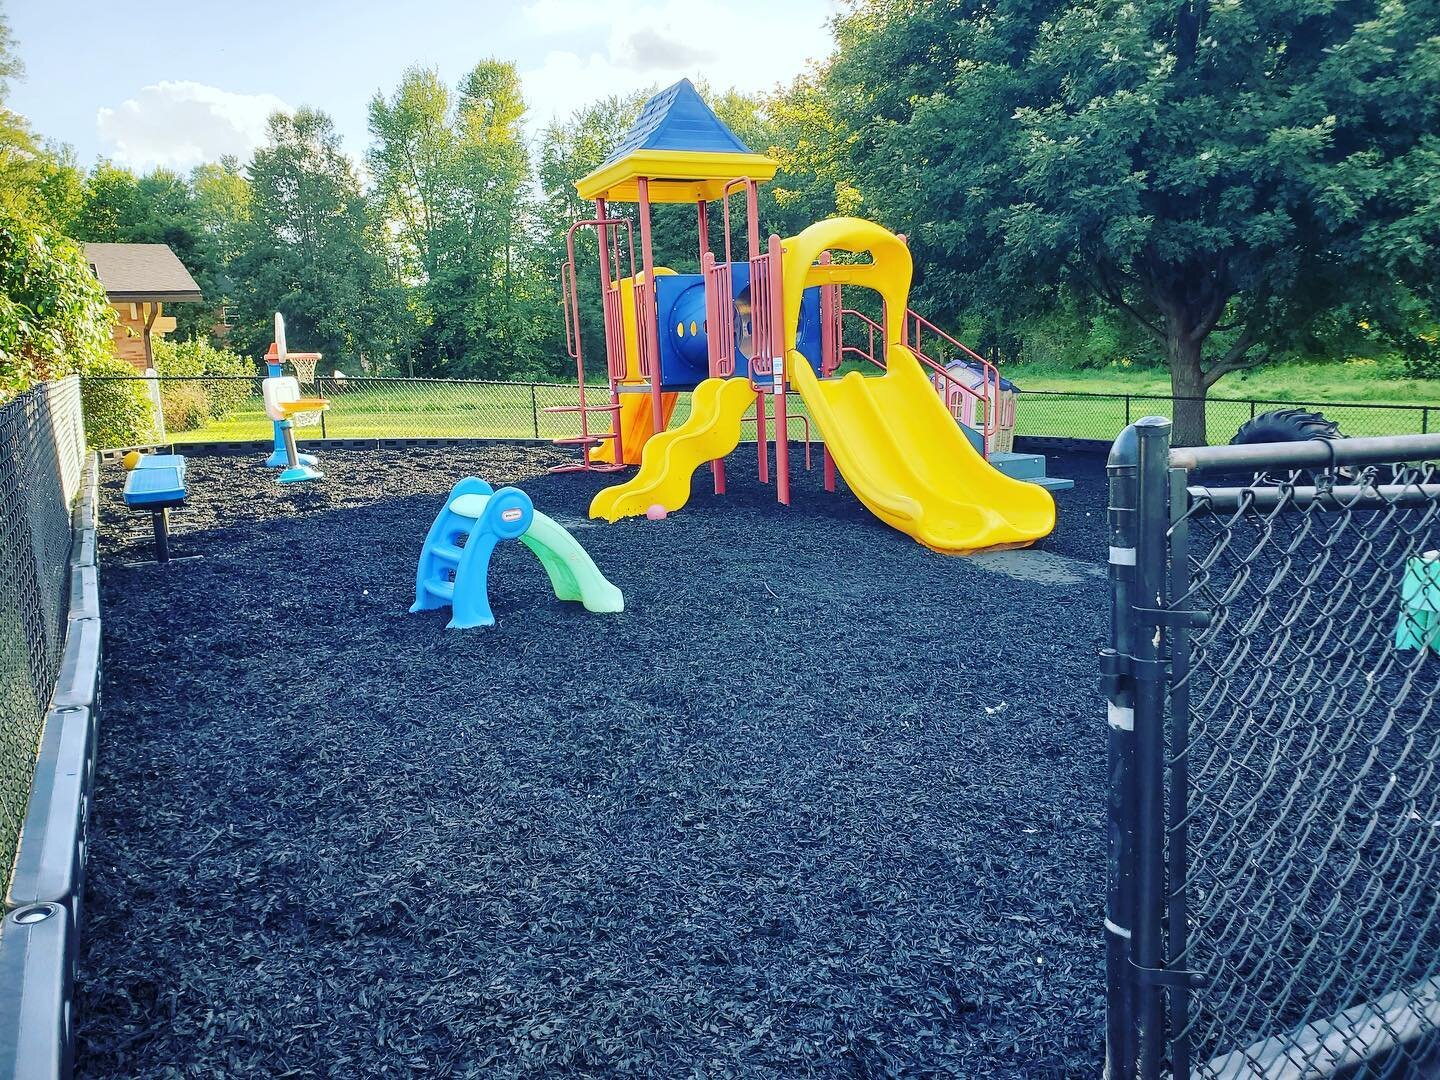 Here&rsquo;s our #first picture of the #playground  since the updates. We can&rsquo;t wait to get a few more shots of it. Can you guess the 3 #updates we did to it? So #happy we were able to get @recreationsoutlet  to #complete it before our #firstda